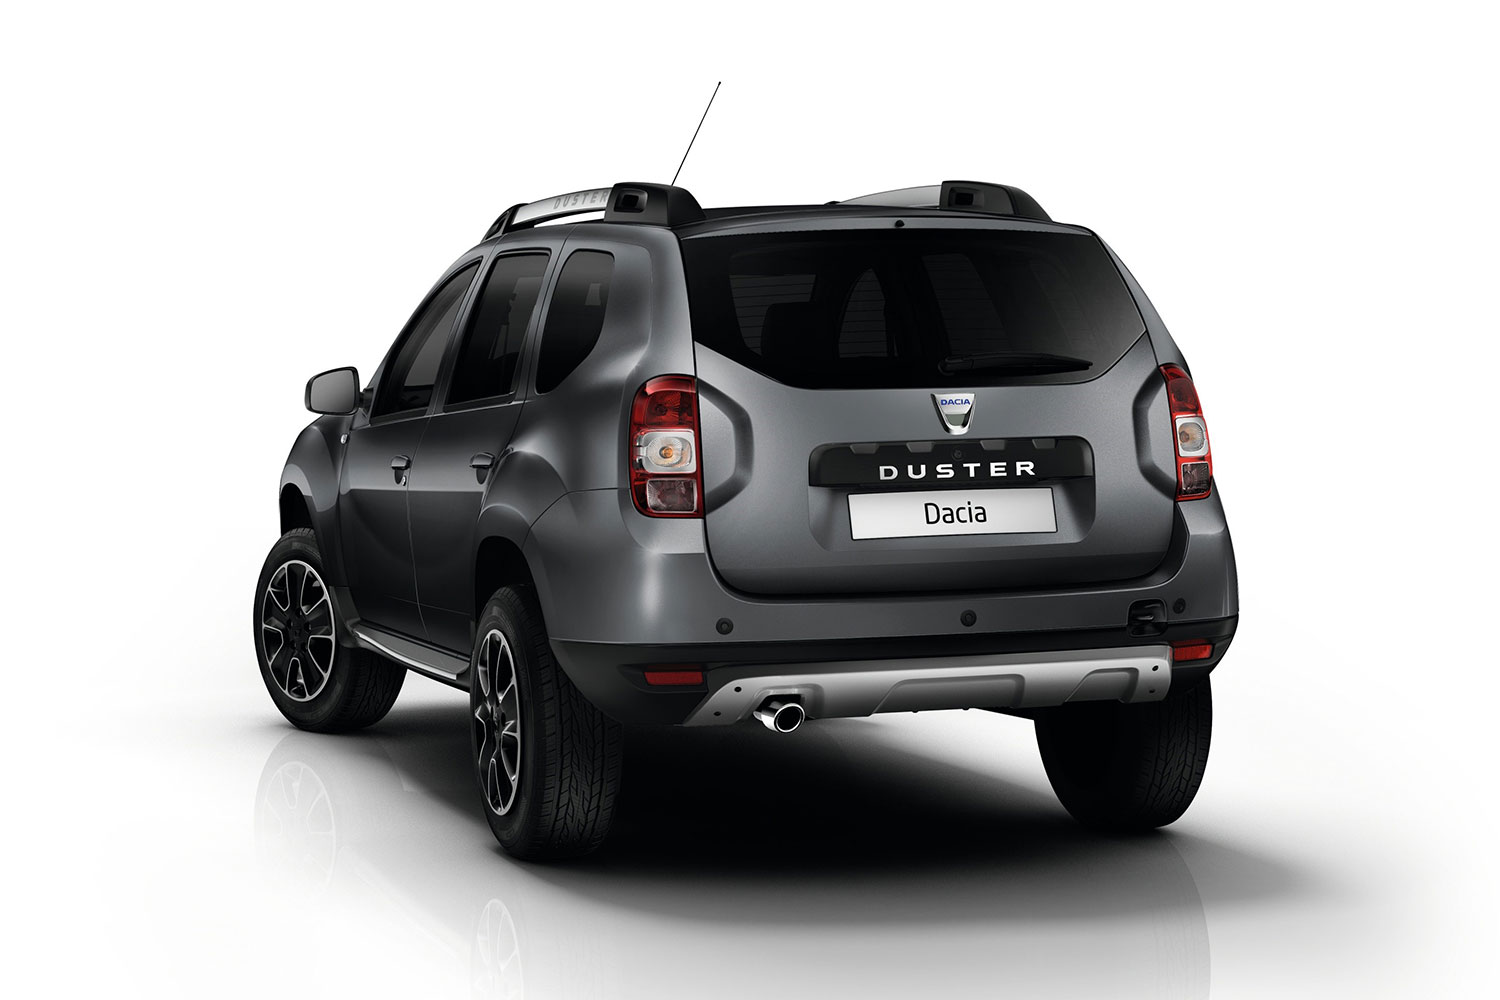 romanias dacia keeps things simple at frankfurt with small tech upgrades 71149 global en